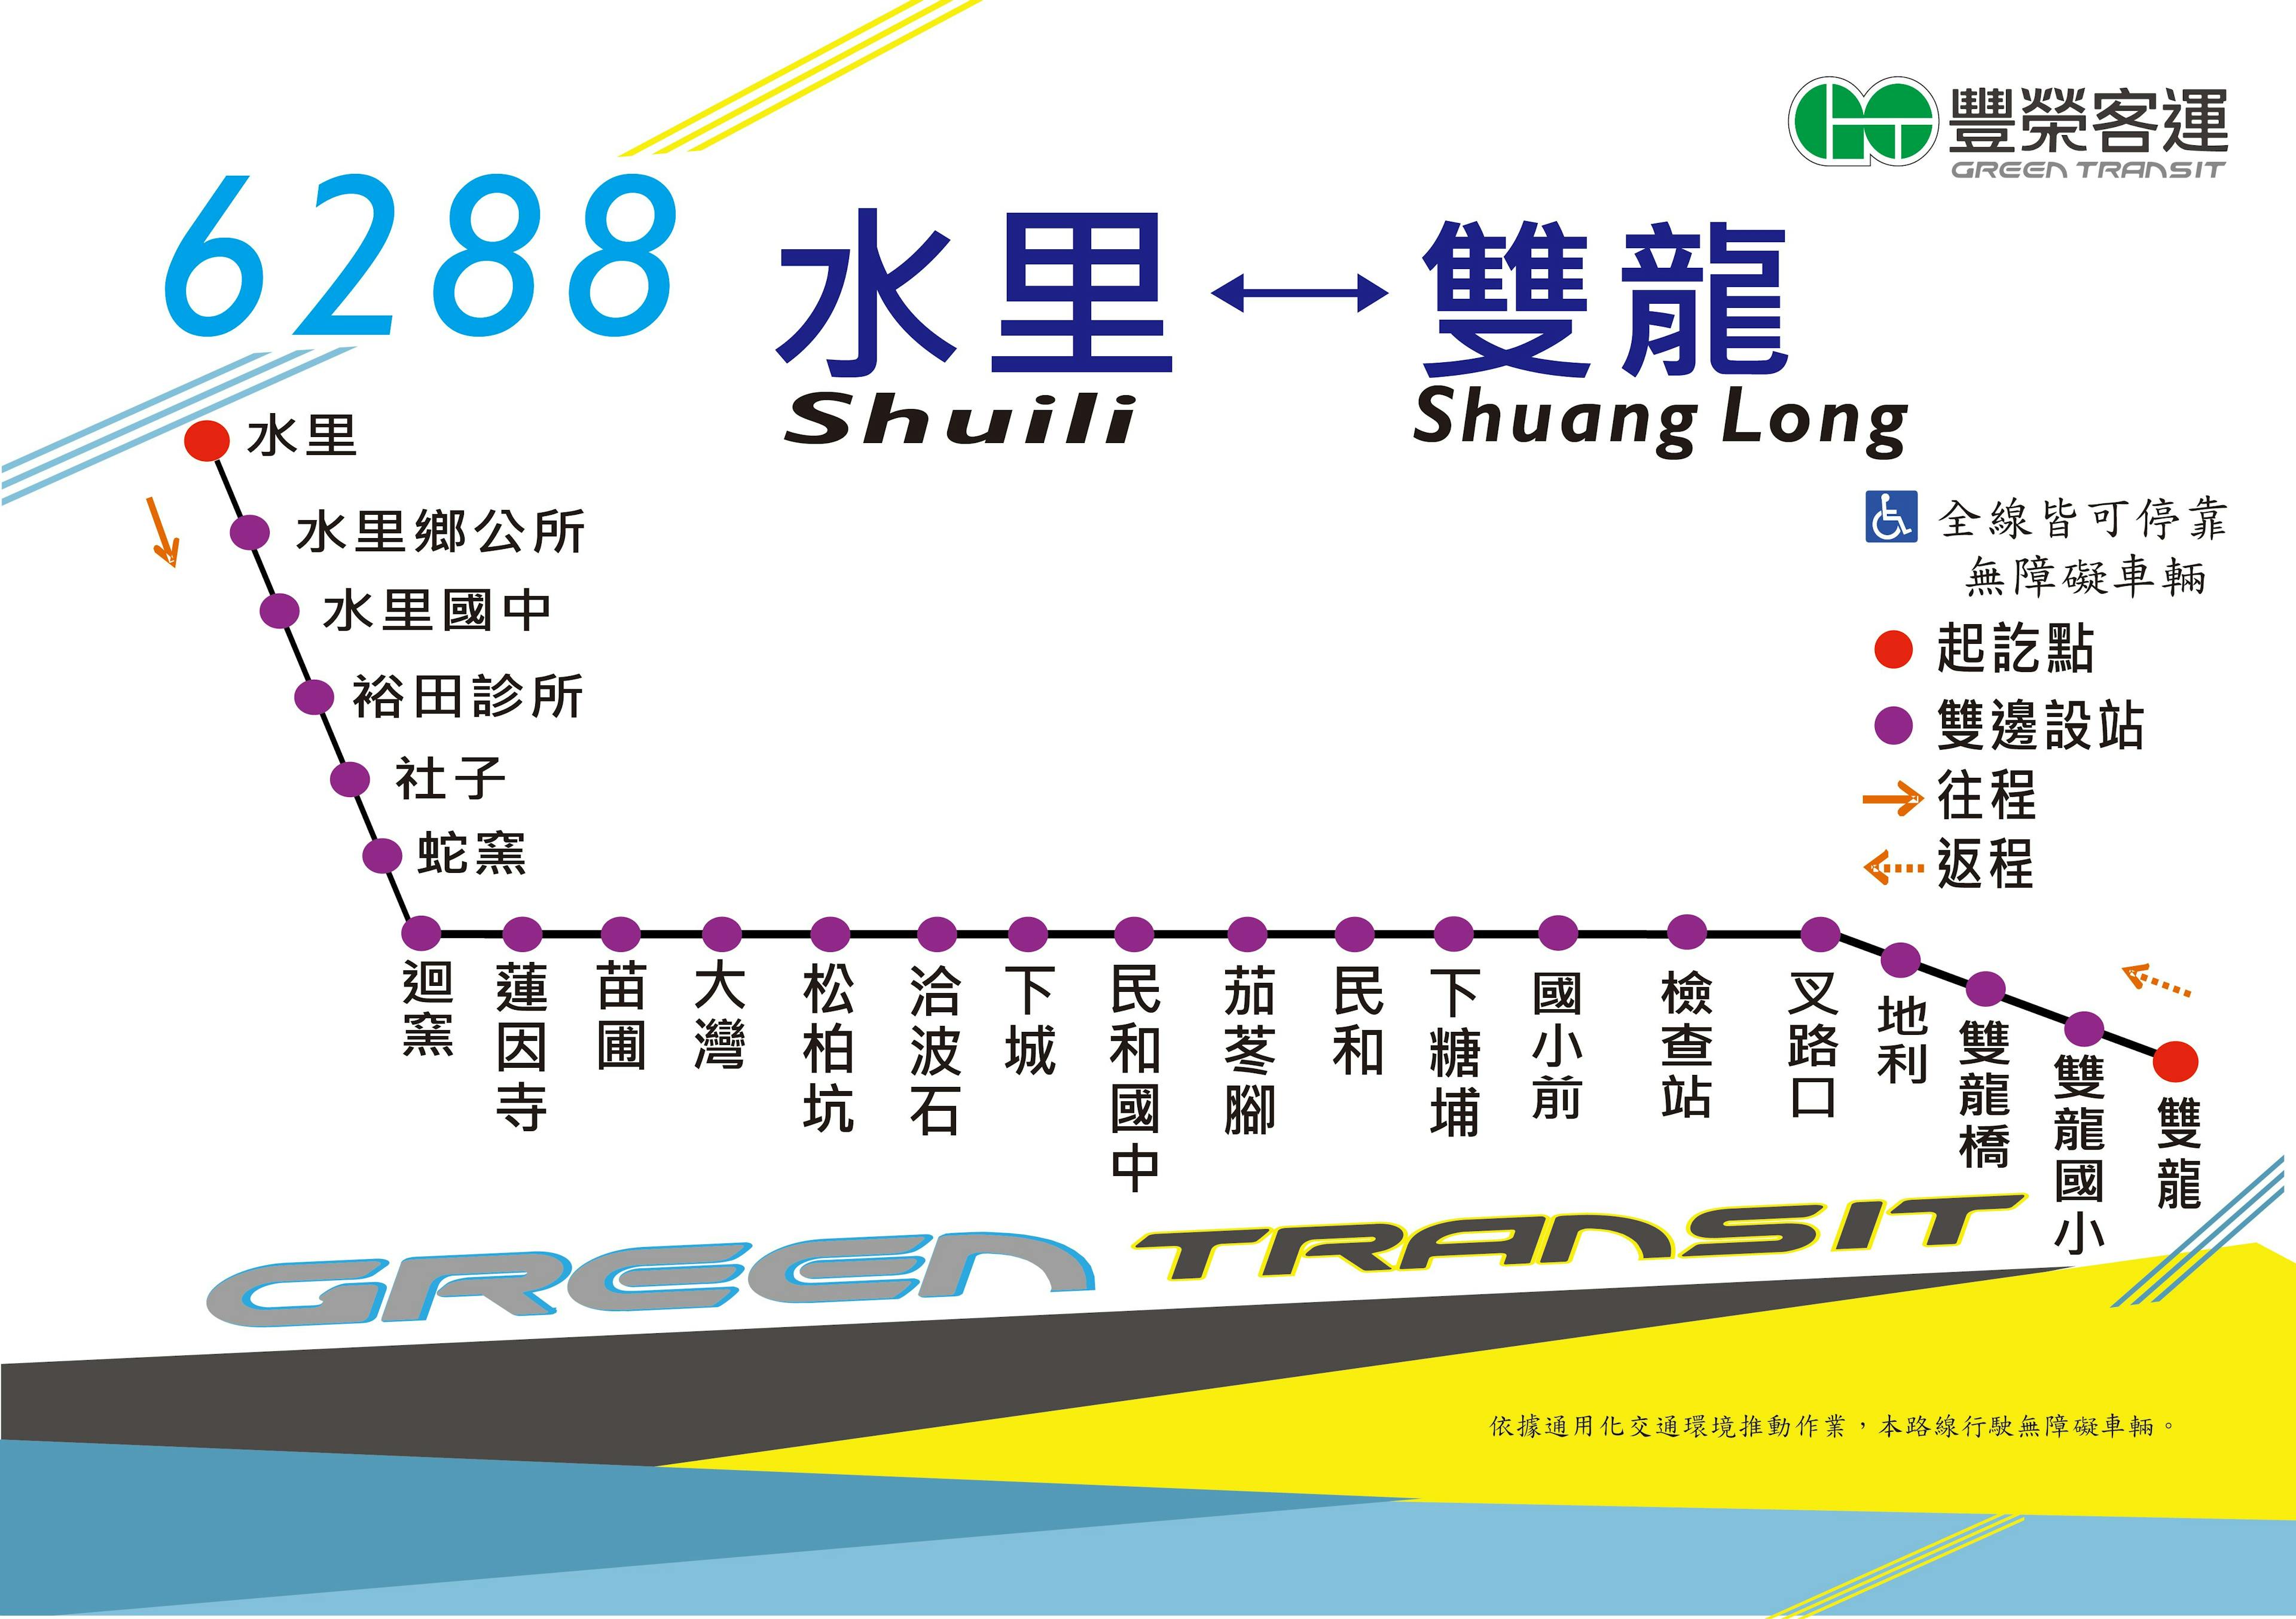 6288Route Map-Green Transit Bus